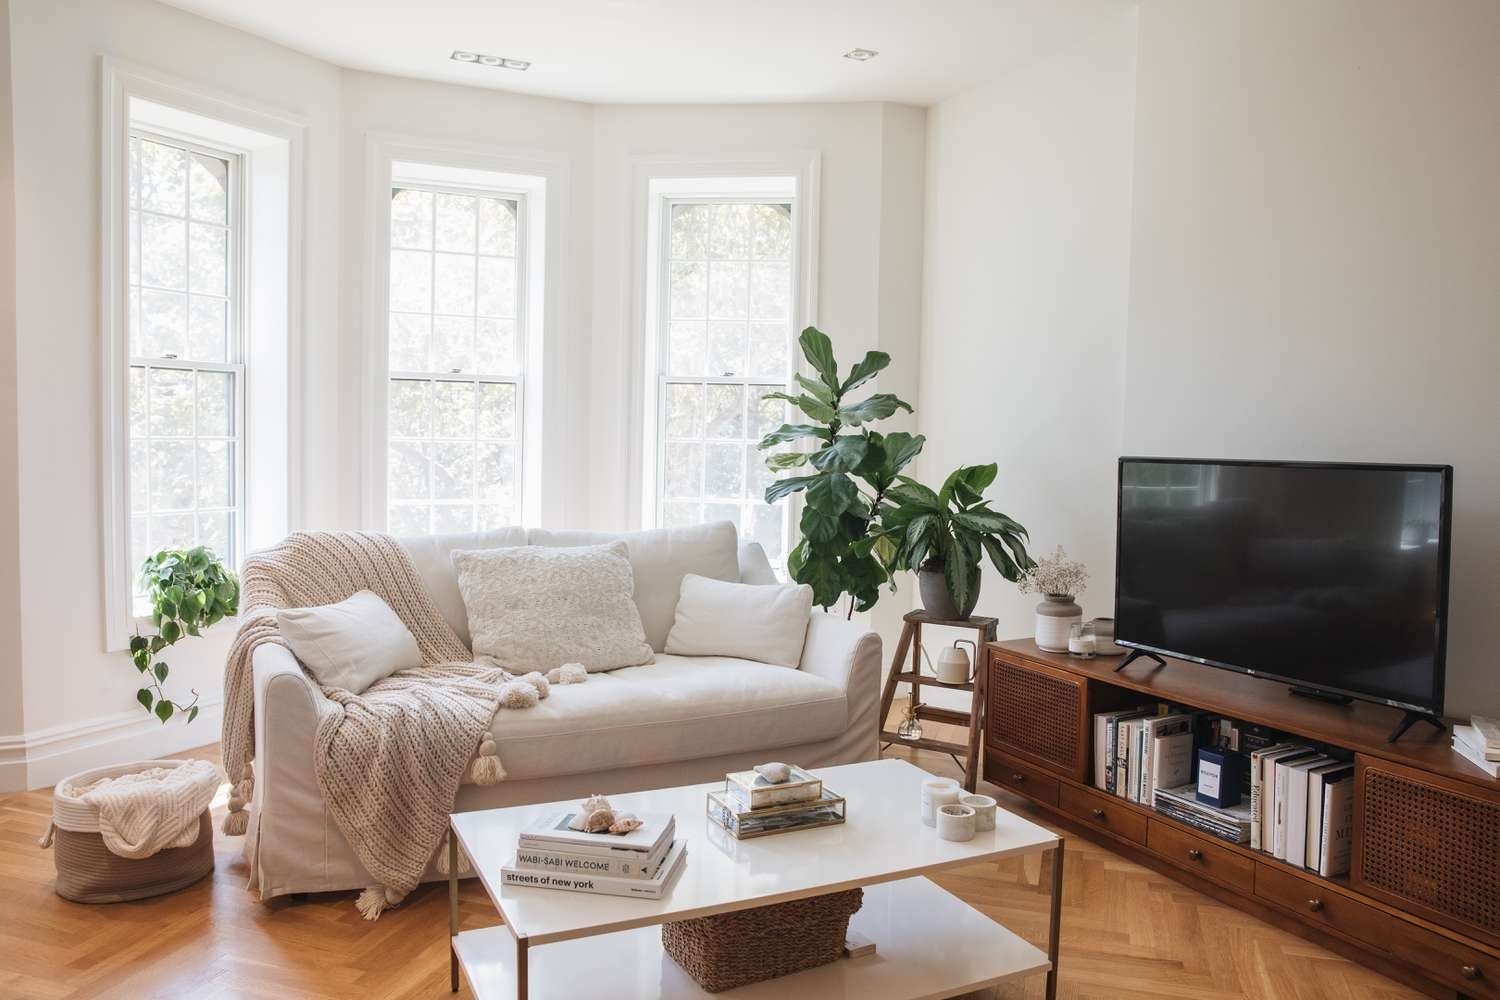 13 Rules For Arranging Living Room Furniture &amp;amp; Tvs within How To Arrange Living Room